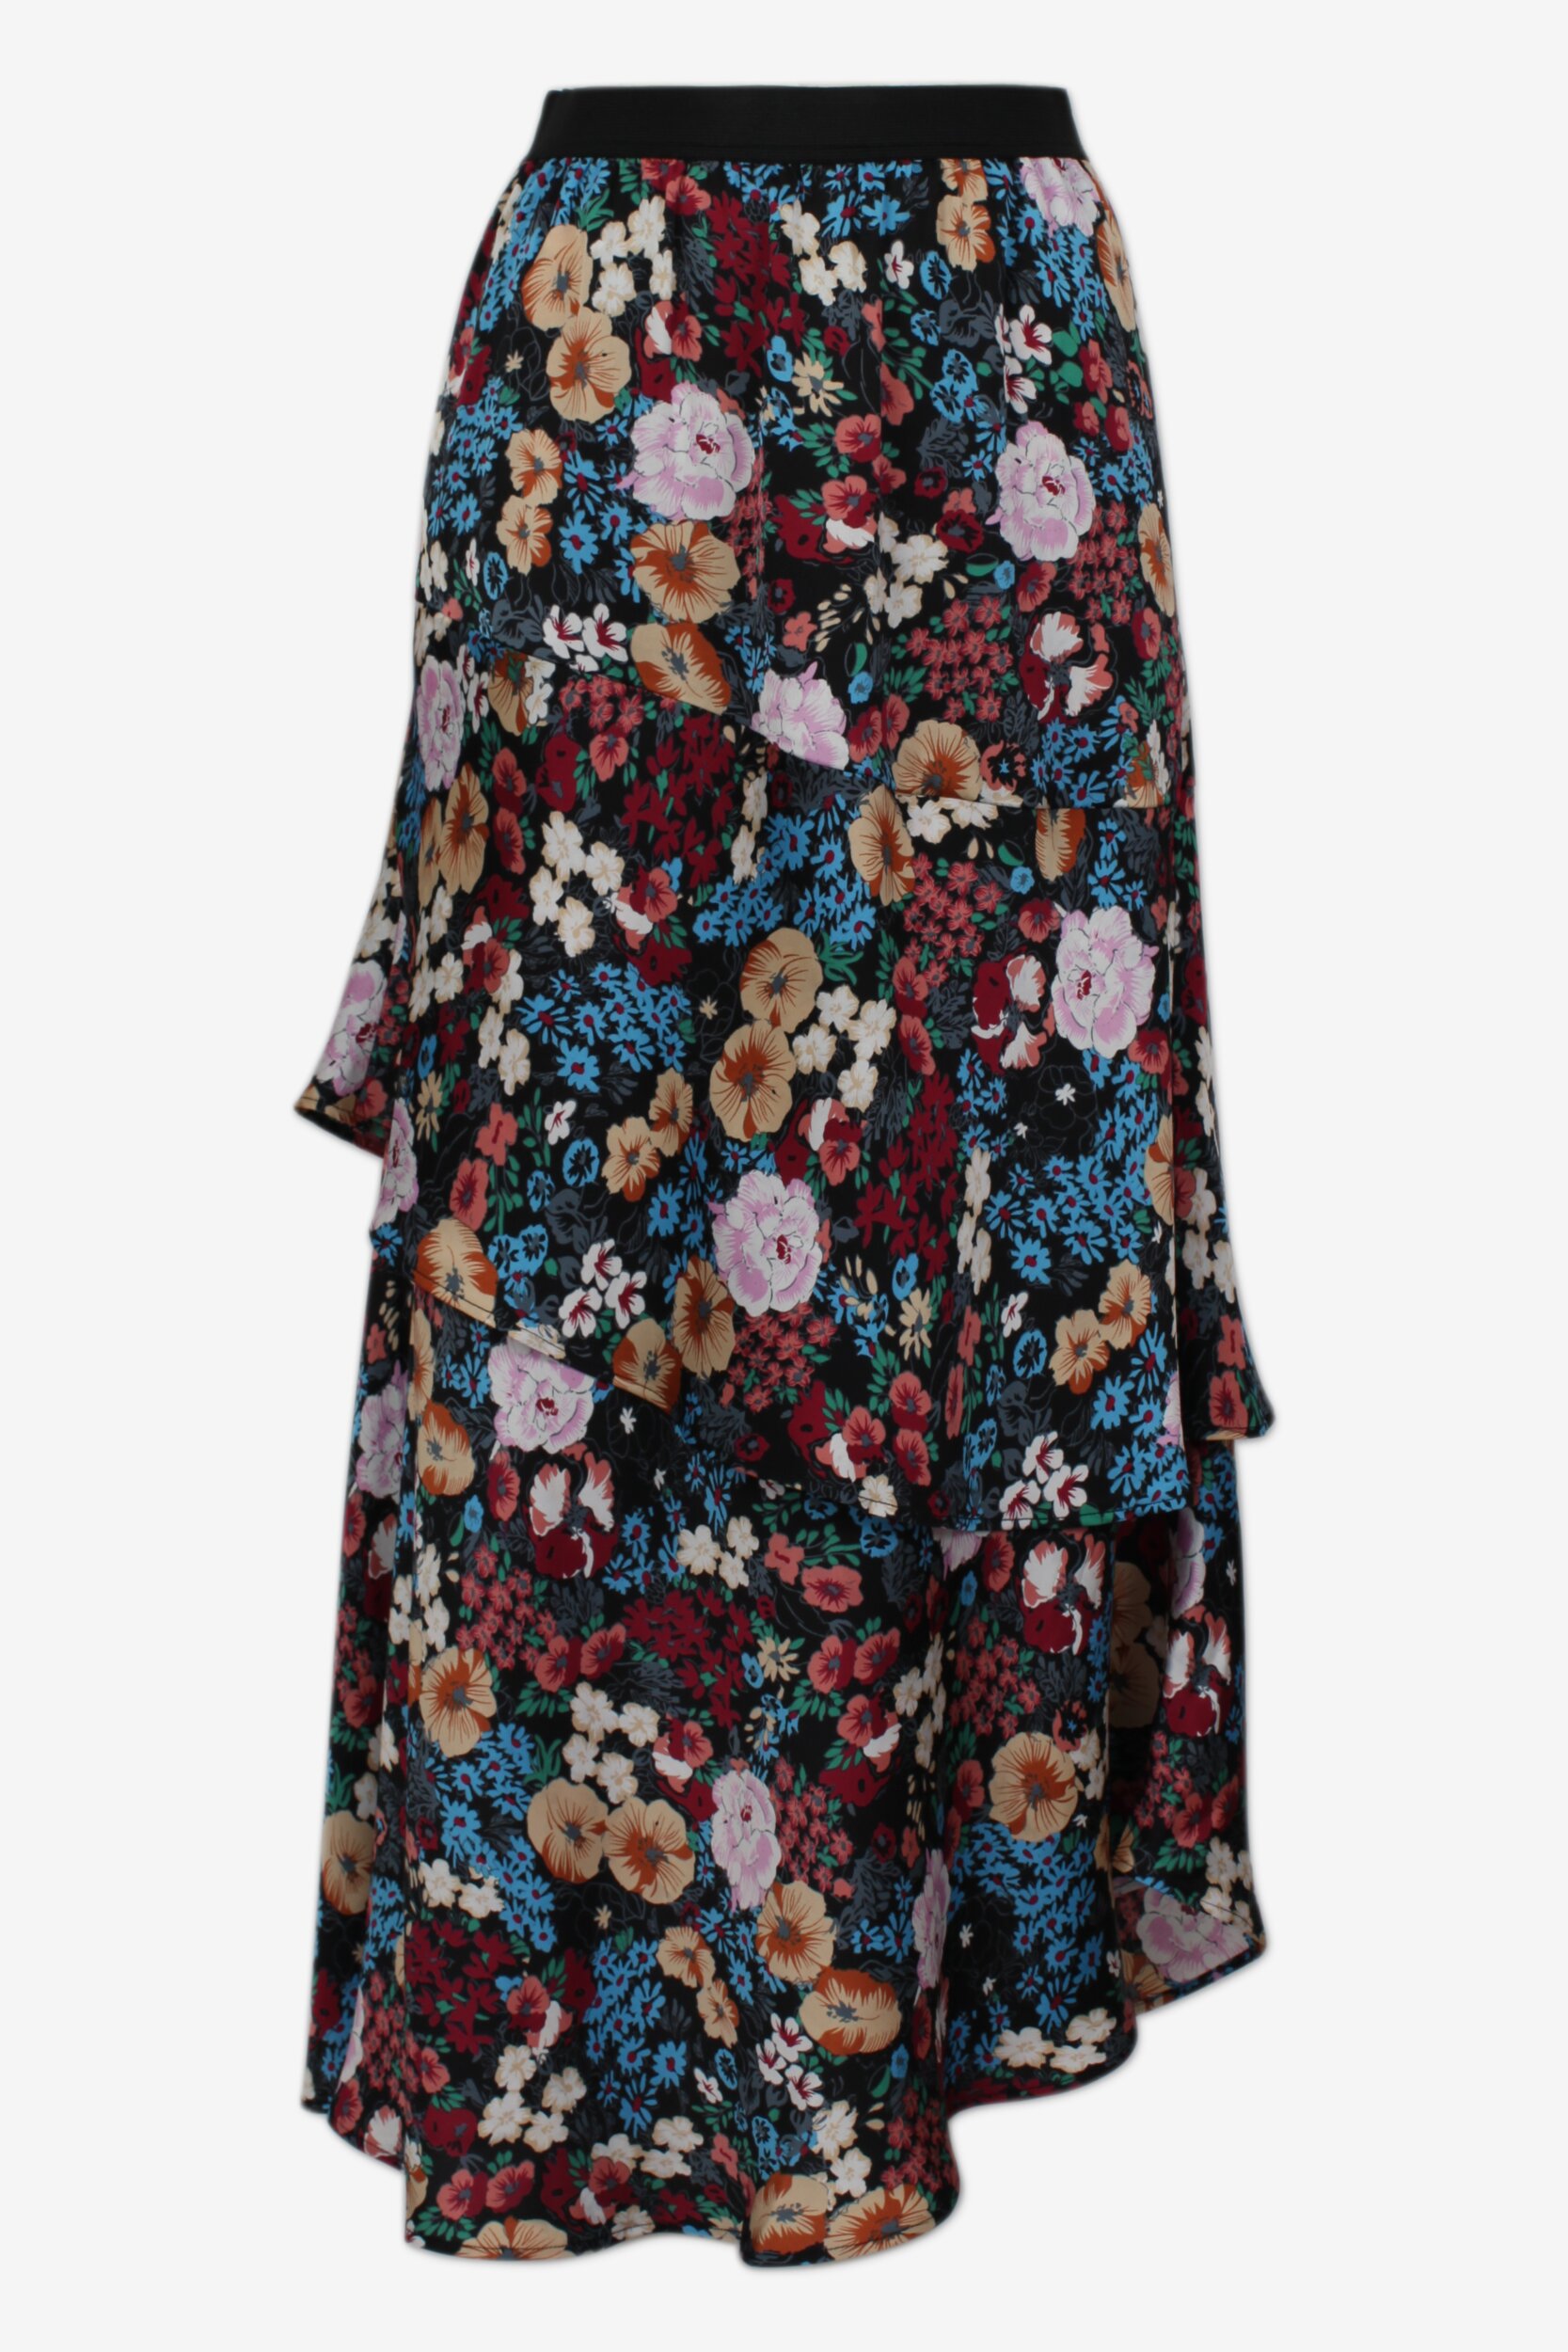 Samour Special Edition Skirt Flower Power  - front image